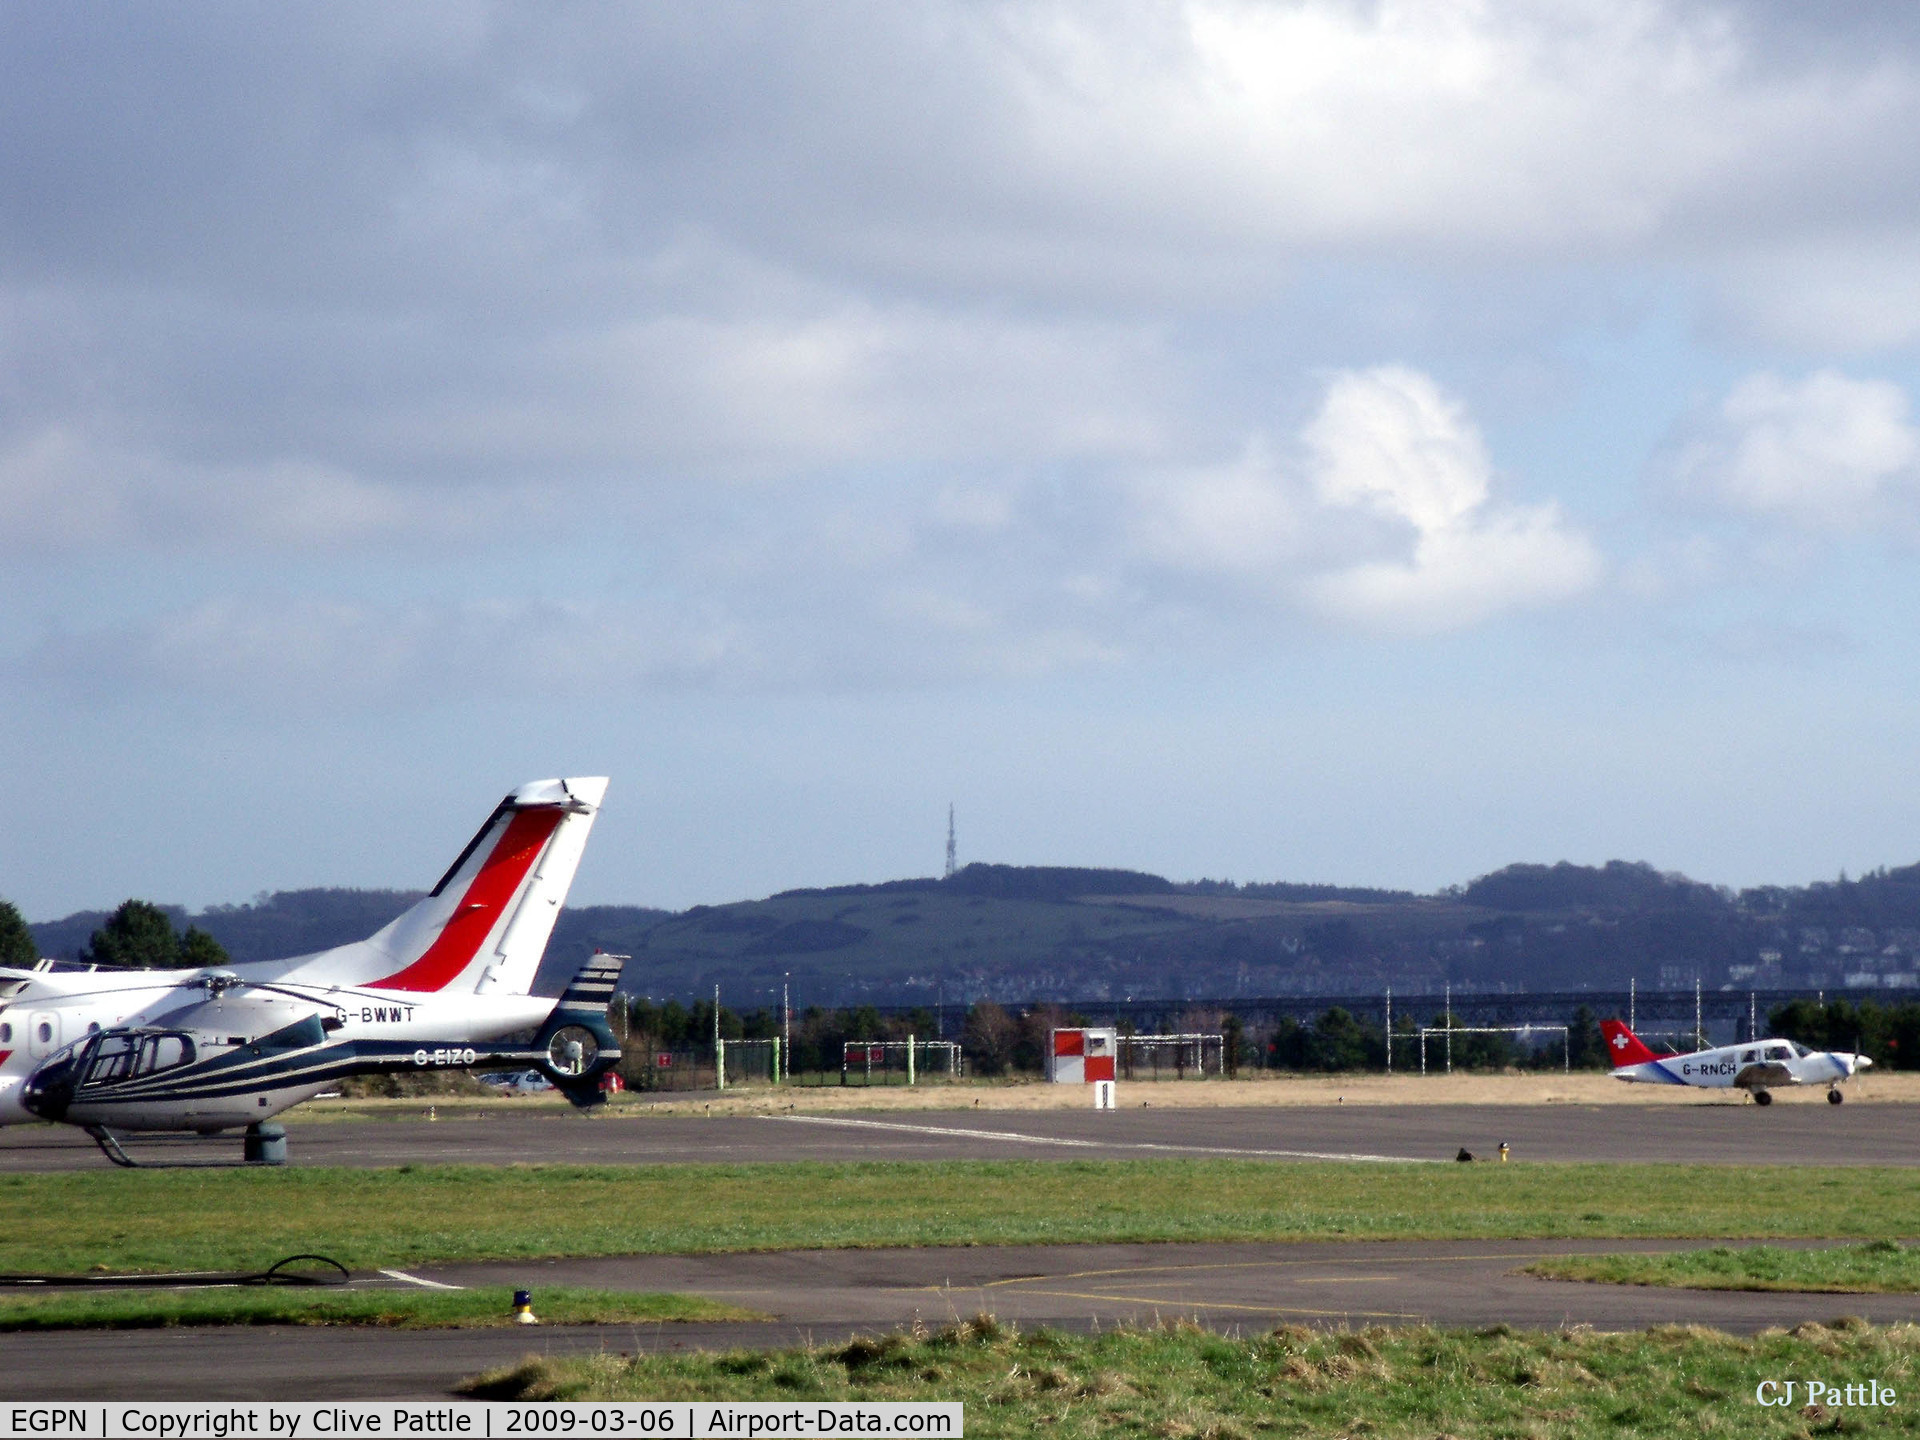 Dundee Airport, Dundee, Scotland United Kingdom (EGPN) - Dundee Riverside (EGPN) Looking eastwards across the field in March 2009